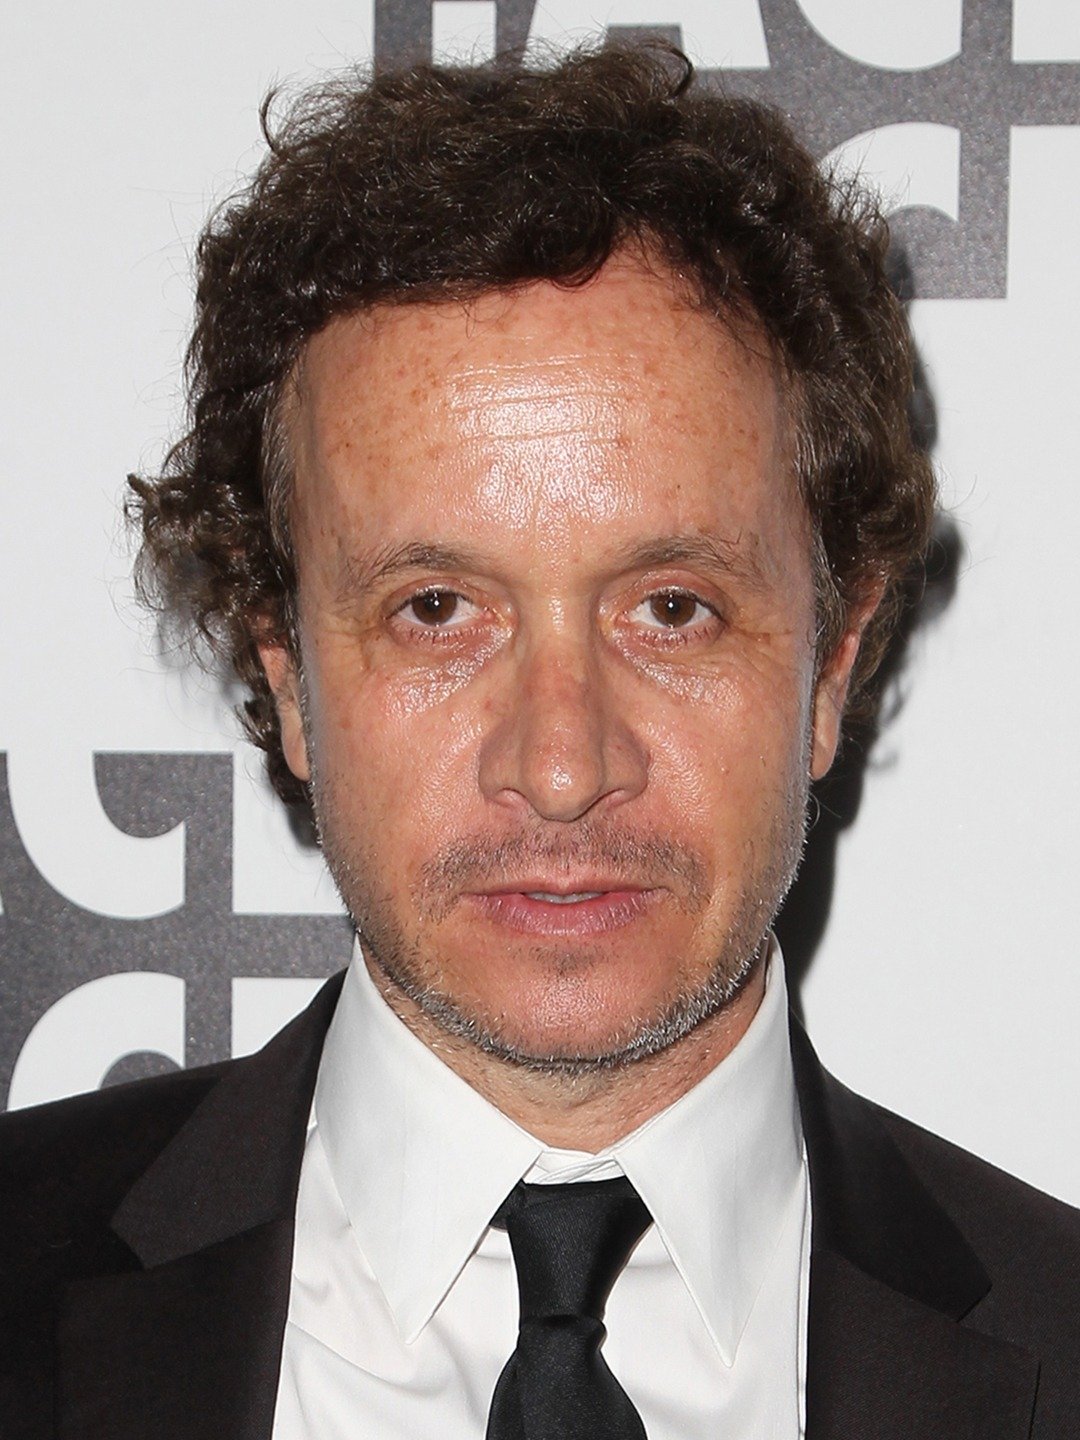 How tall is Pauly Shore?